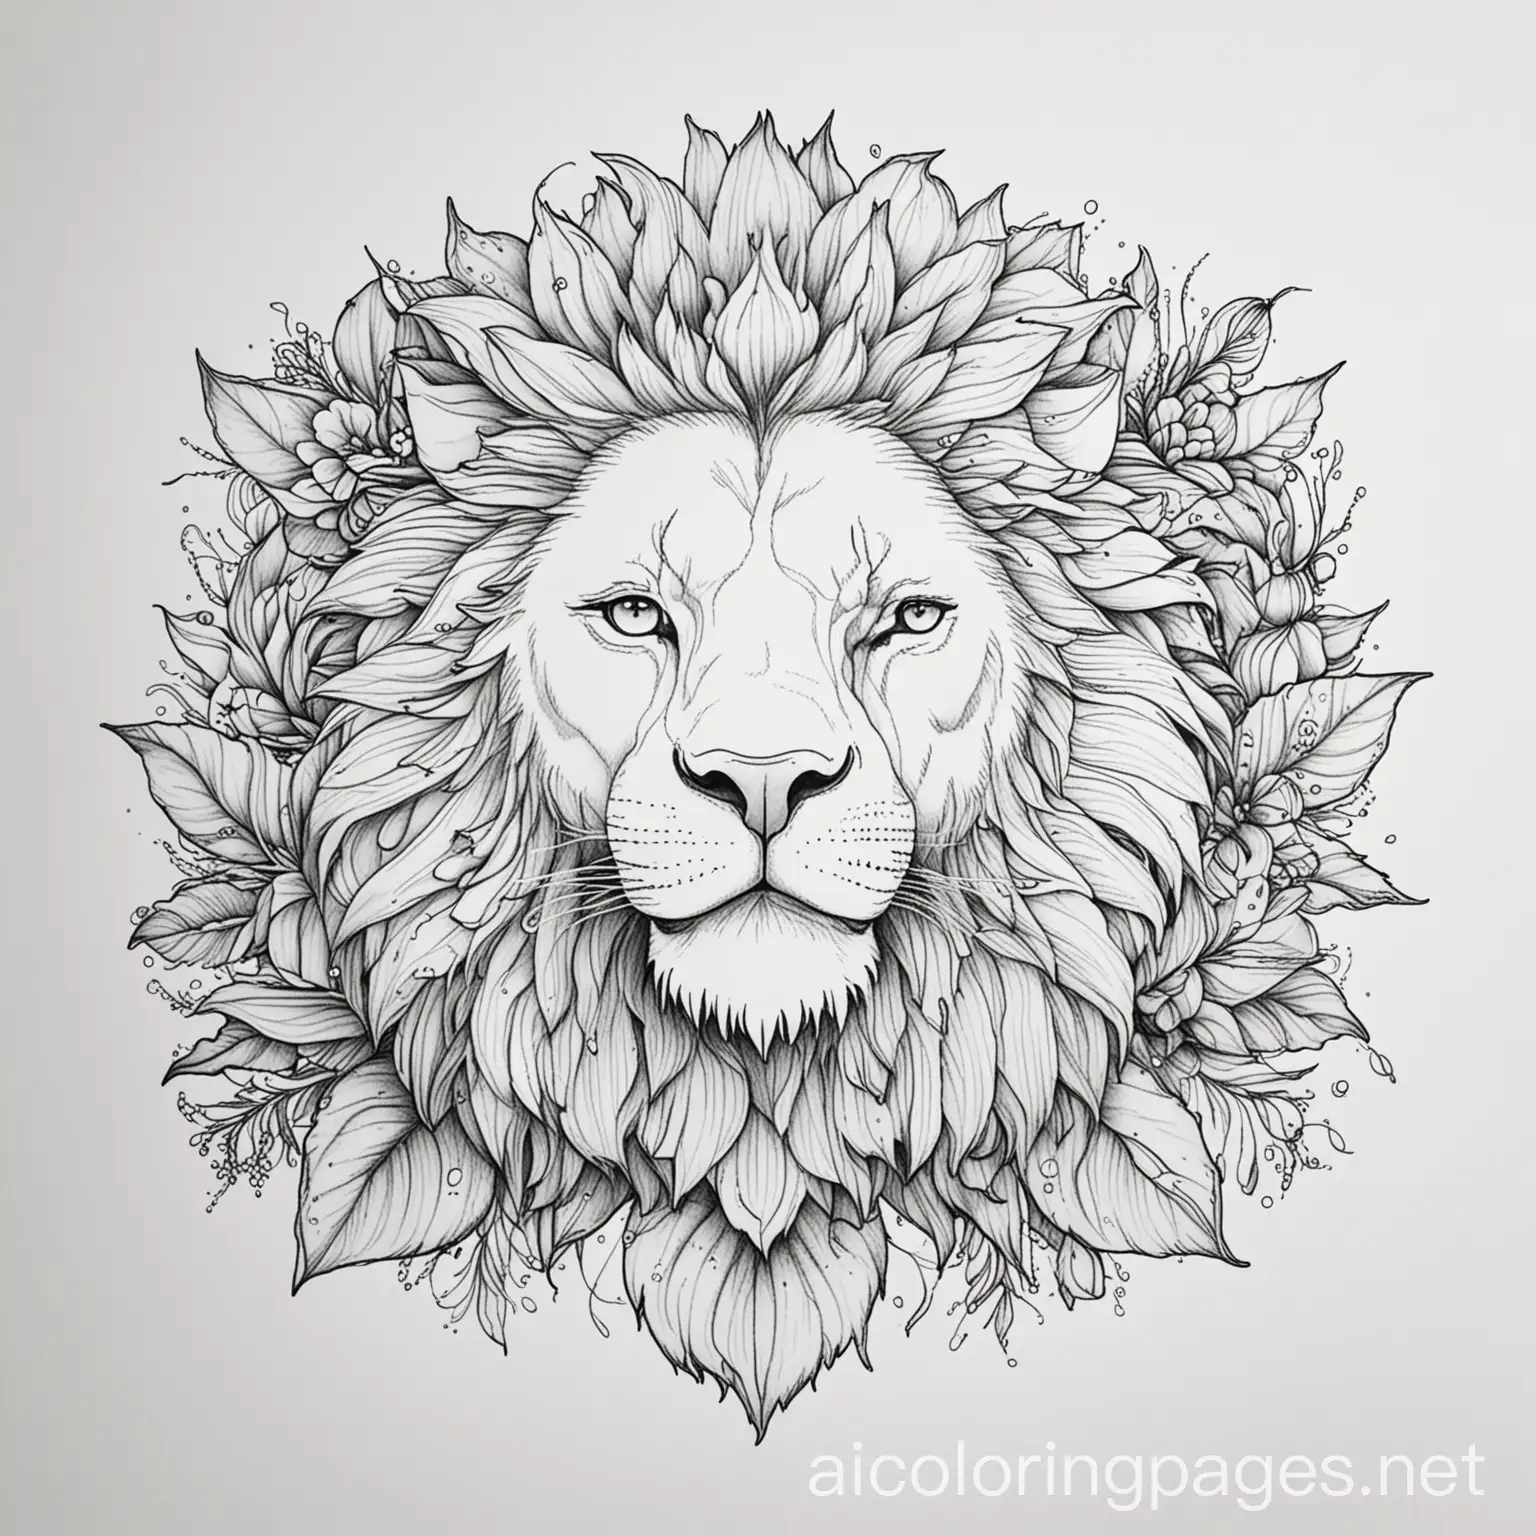 Lion-Flower-Coloring-Page-Simple-Line-Art-on-White-Background